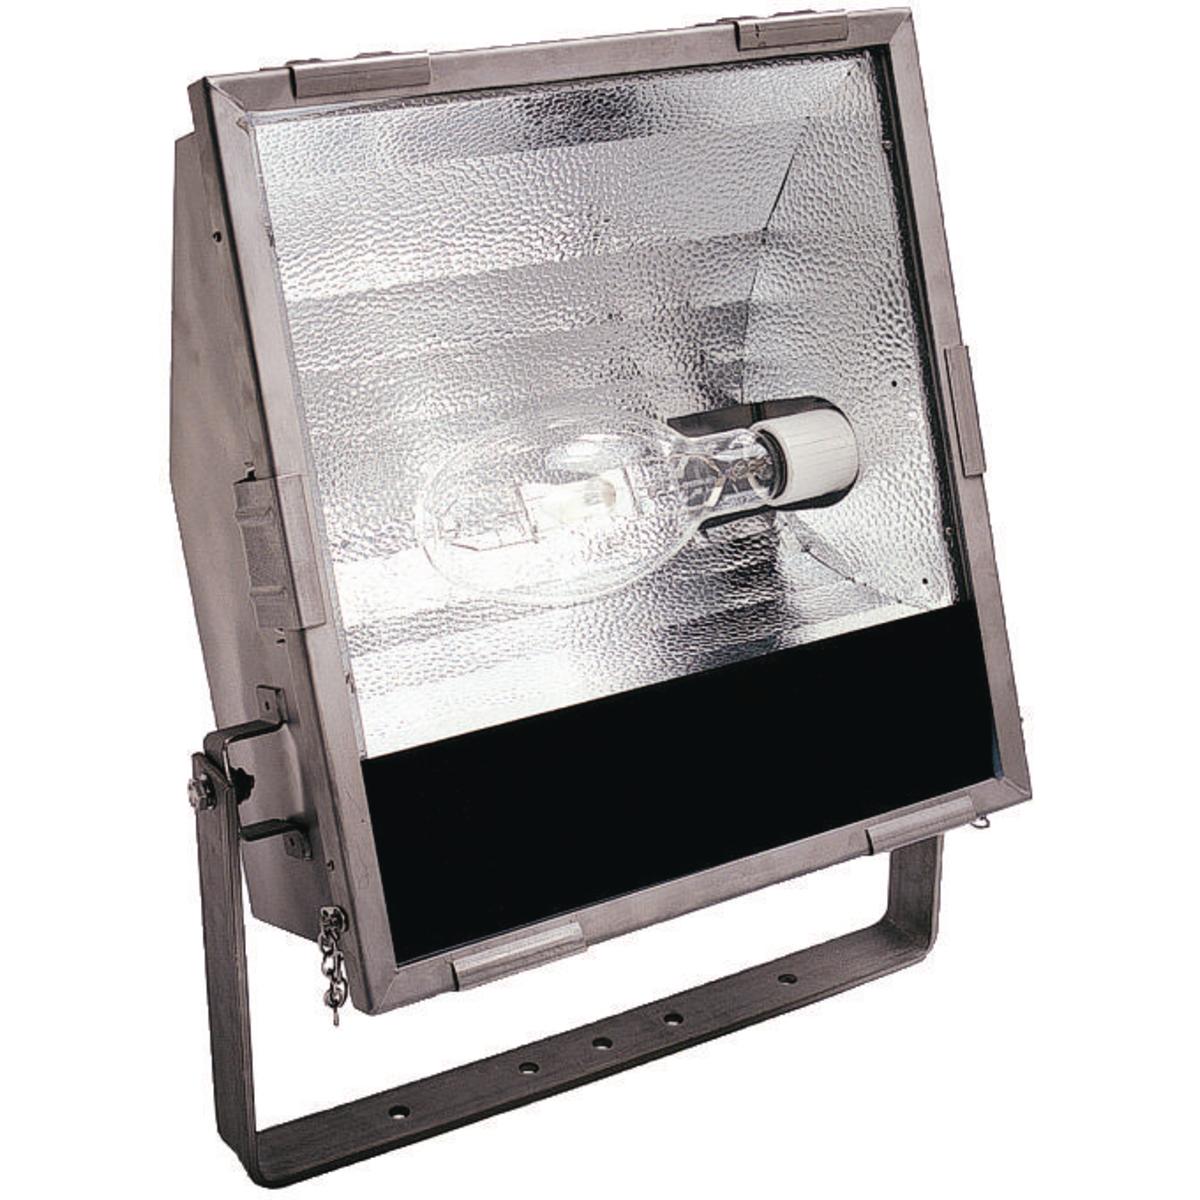 Hubbell KFS256SS KFSS Series - Stainless Steel 250 Watt High Pressure Sodium Marine Floodlight (Lamp Not Included) - 120/277/347V At 60Hz  ; Type 316 Stainless Steel Housing. 16-gauge housing ensures low corrosion and long life, reducing maintenance costs ; Rugged quick-r